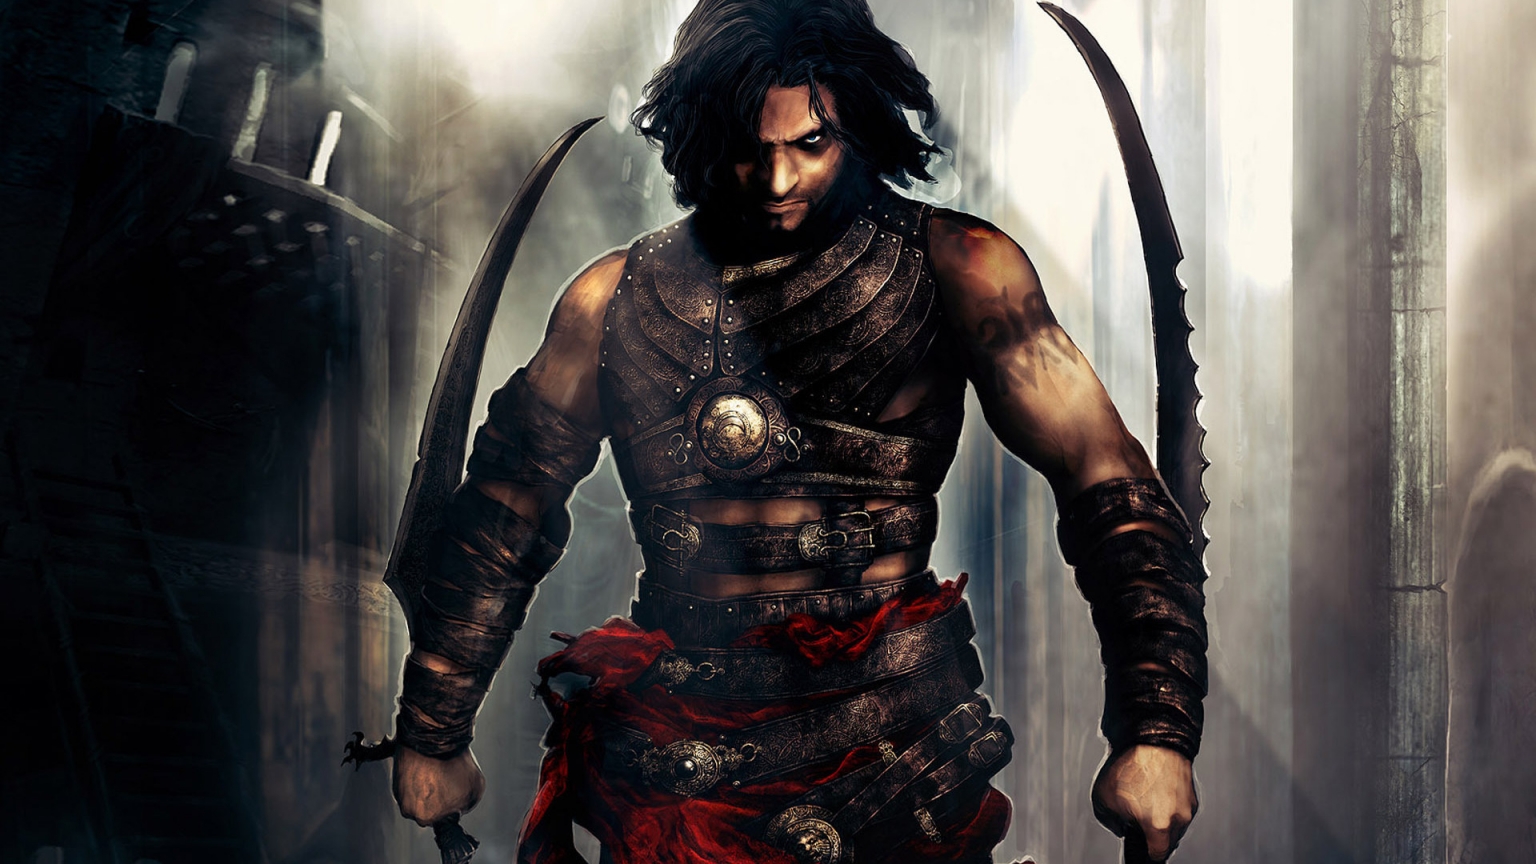 Prince of Persia Scene for 1536 x 864 HDTV resolution